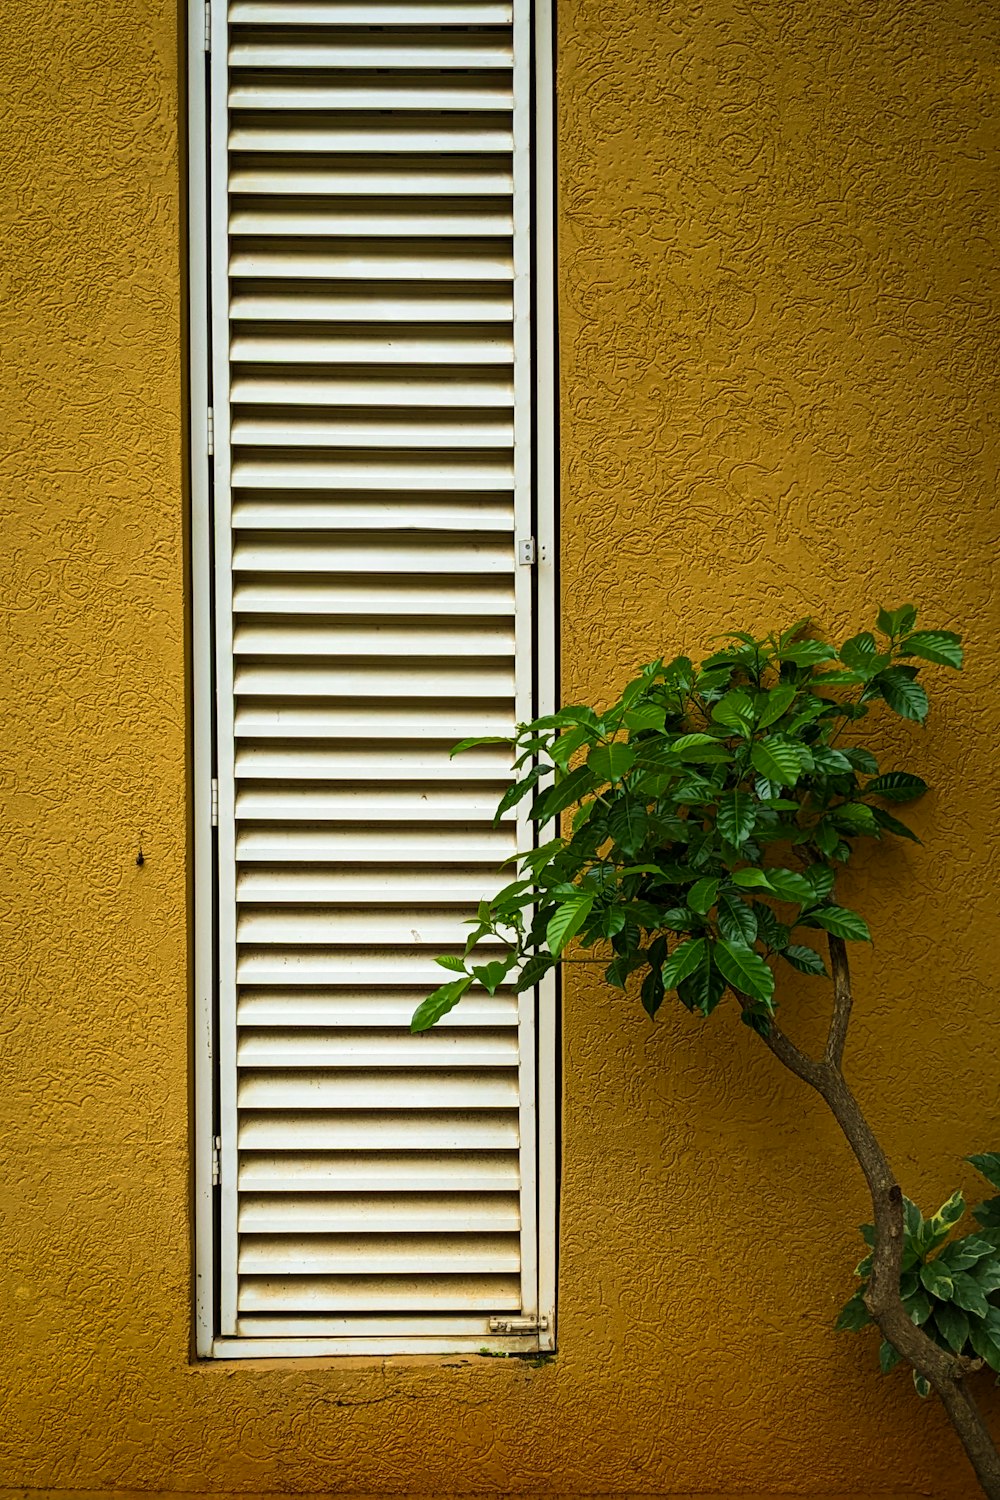 a window with blinds